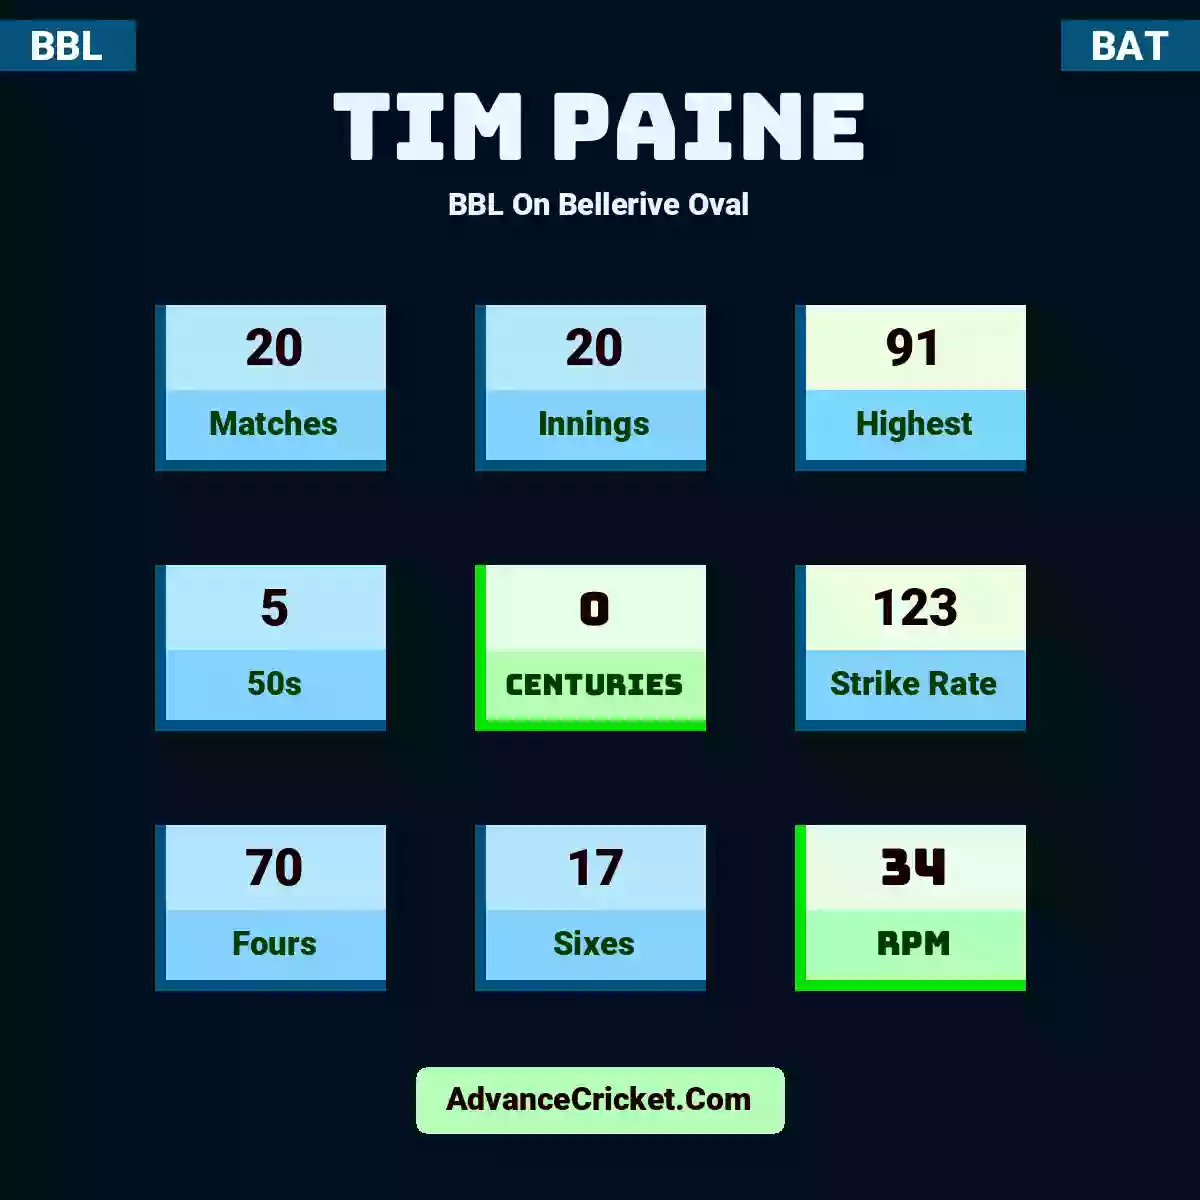 Tim Paine BBL  On Bellerive Oval, Tim Paine played 20 matches, scored 91 runs as highest, 5 half-centuries, and 0 centuries, with a strike rate of 123. T.Paine hit 70 fours and 17 sixes, with an RPM of 34.